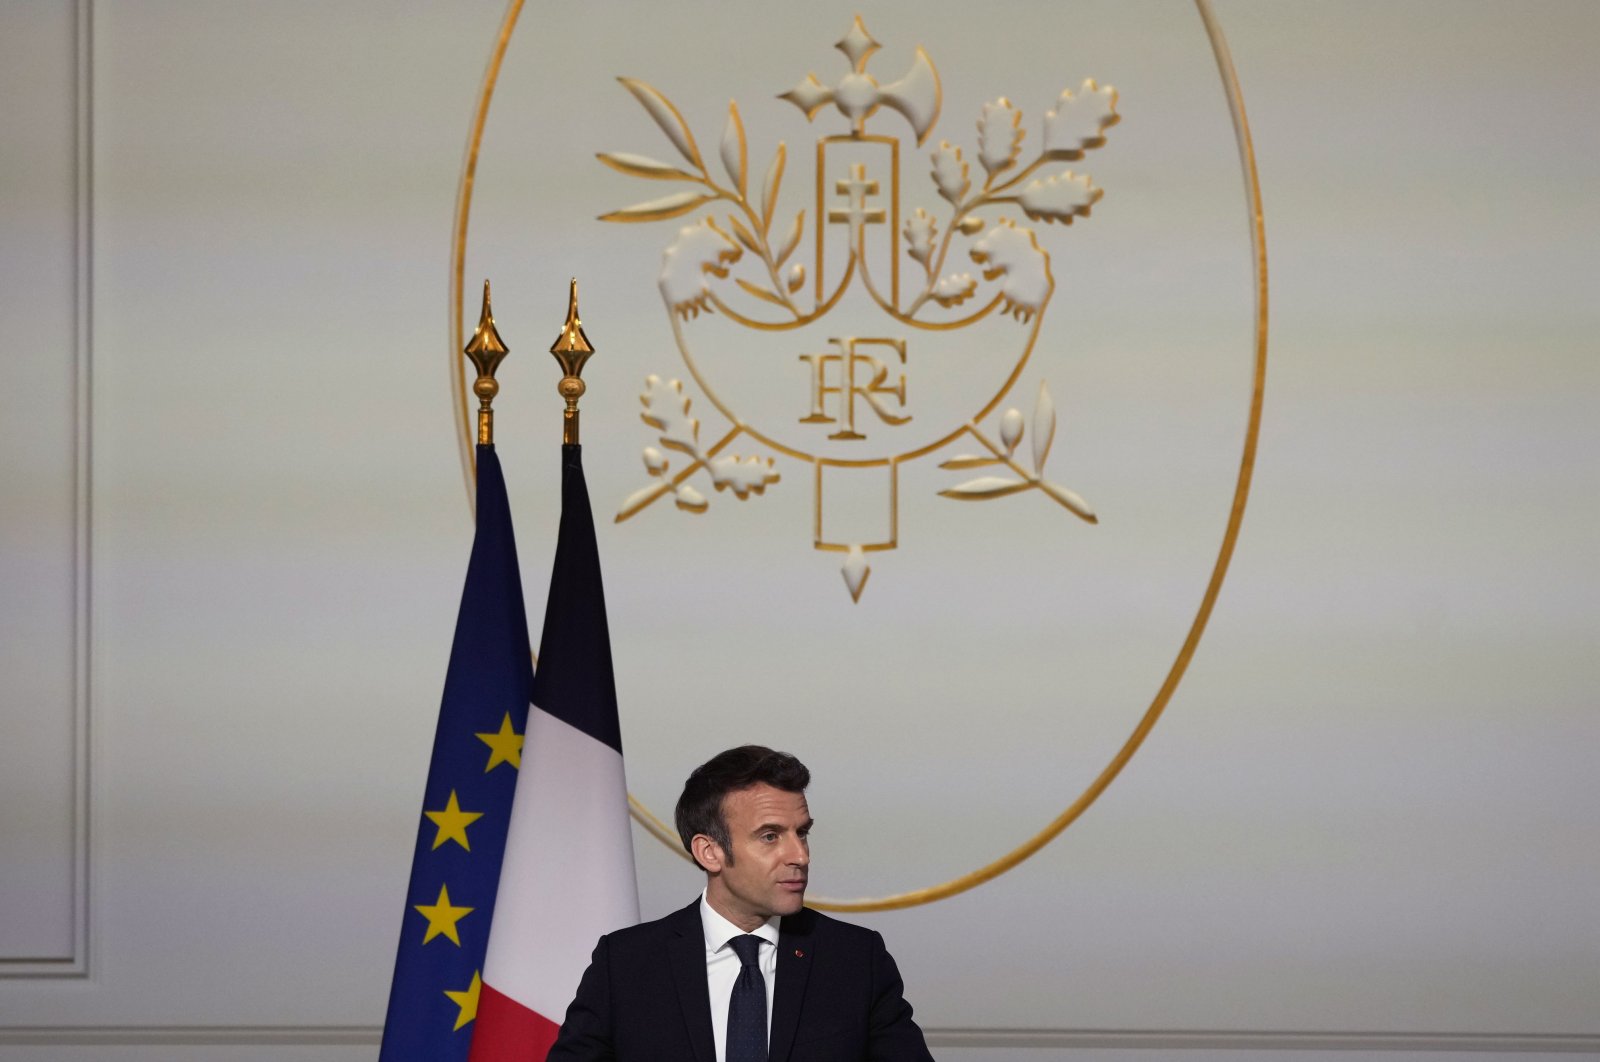 French President Emmanuel Macron delivers a speech during a ceremony to honor the 28 French medal-winning athletes of the Beijing 2022 Winter Olympics and Paralympics at the Elysee Palace in Paris, France, March 29, 2022.  (EPA Photo)